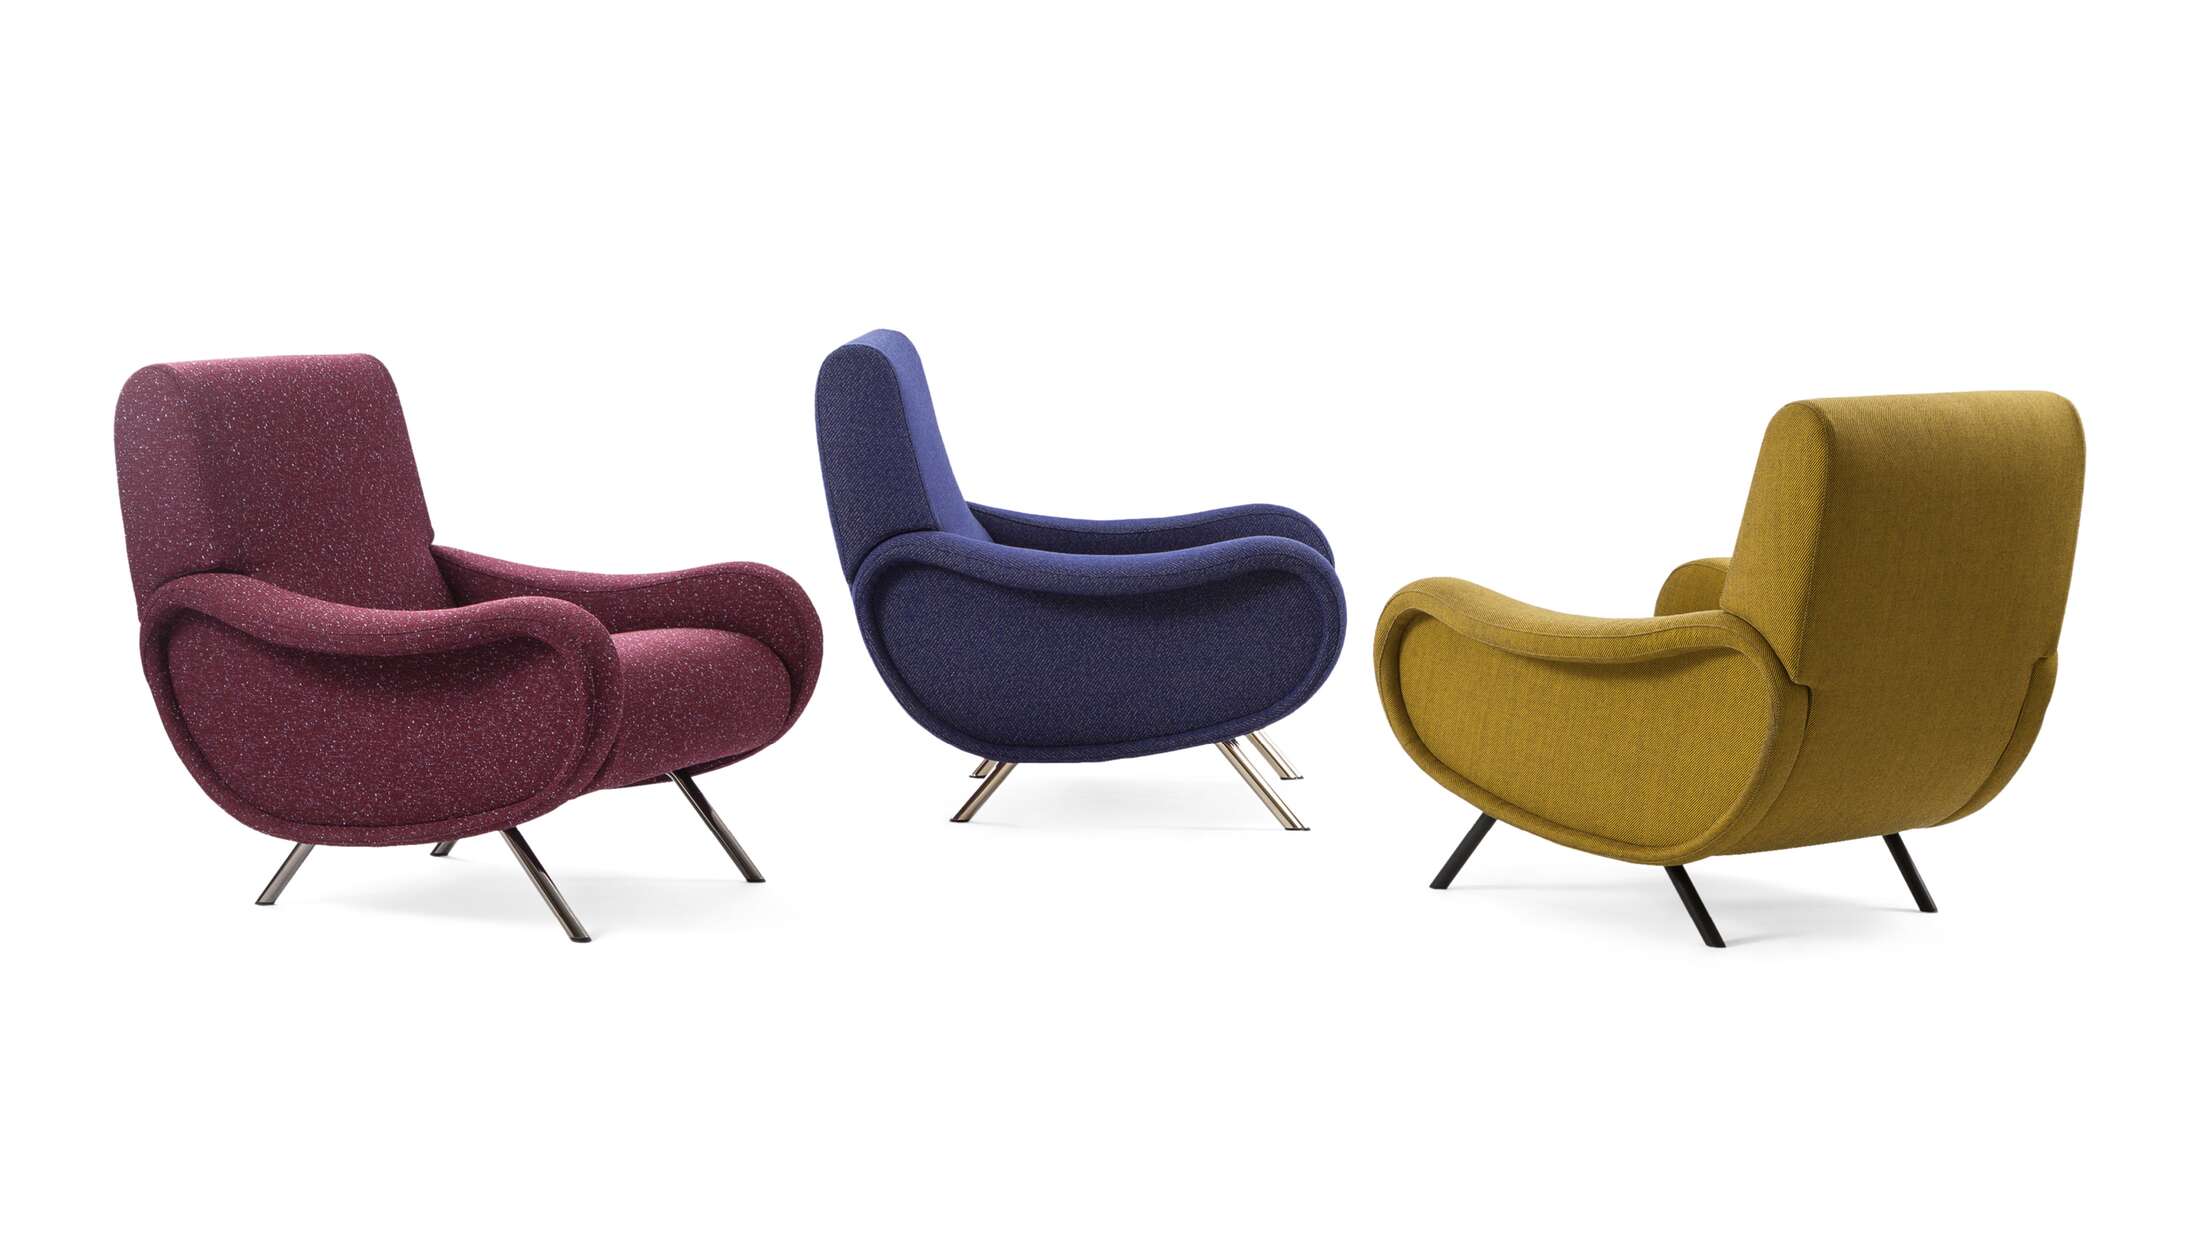 Prices vary dependent on the color/material of the chair. 

Armchair designed by Marco Zanuso in 1951, relaunched in 2015. Manufactured by Cassina in Italy. An icon of 1950s Italian design, the armchair-sofa lady stands out for its extraordinarily